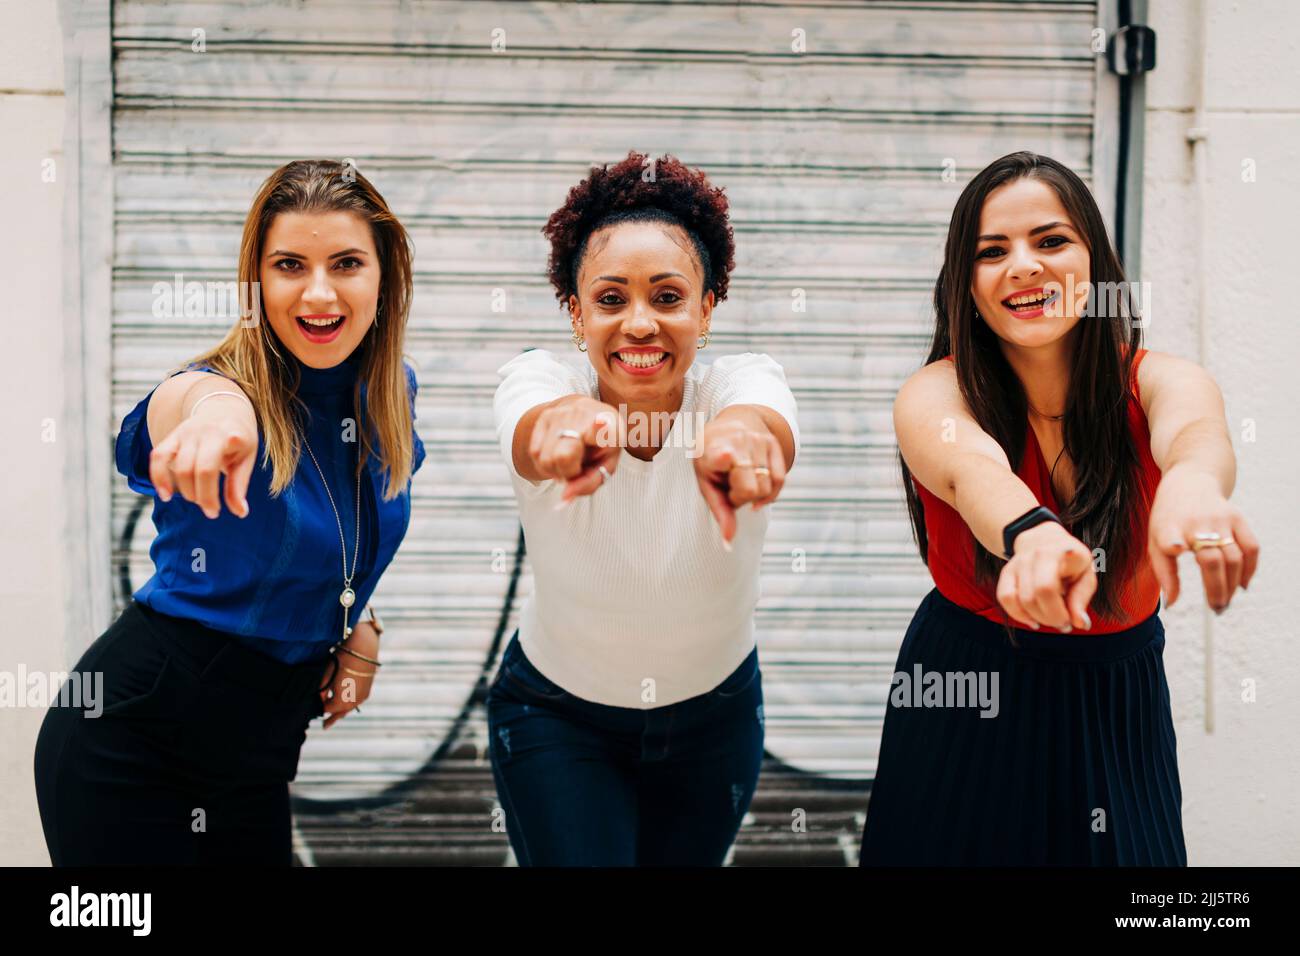 Happy women pointing in front of closed shutter Stock Photo